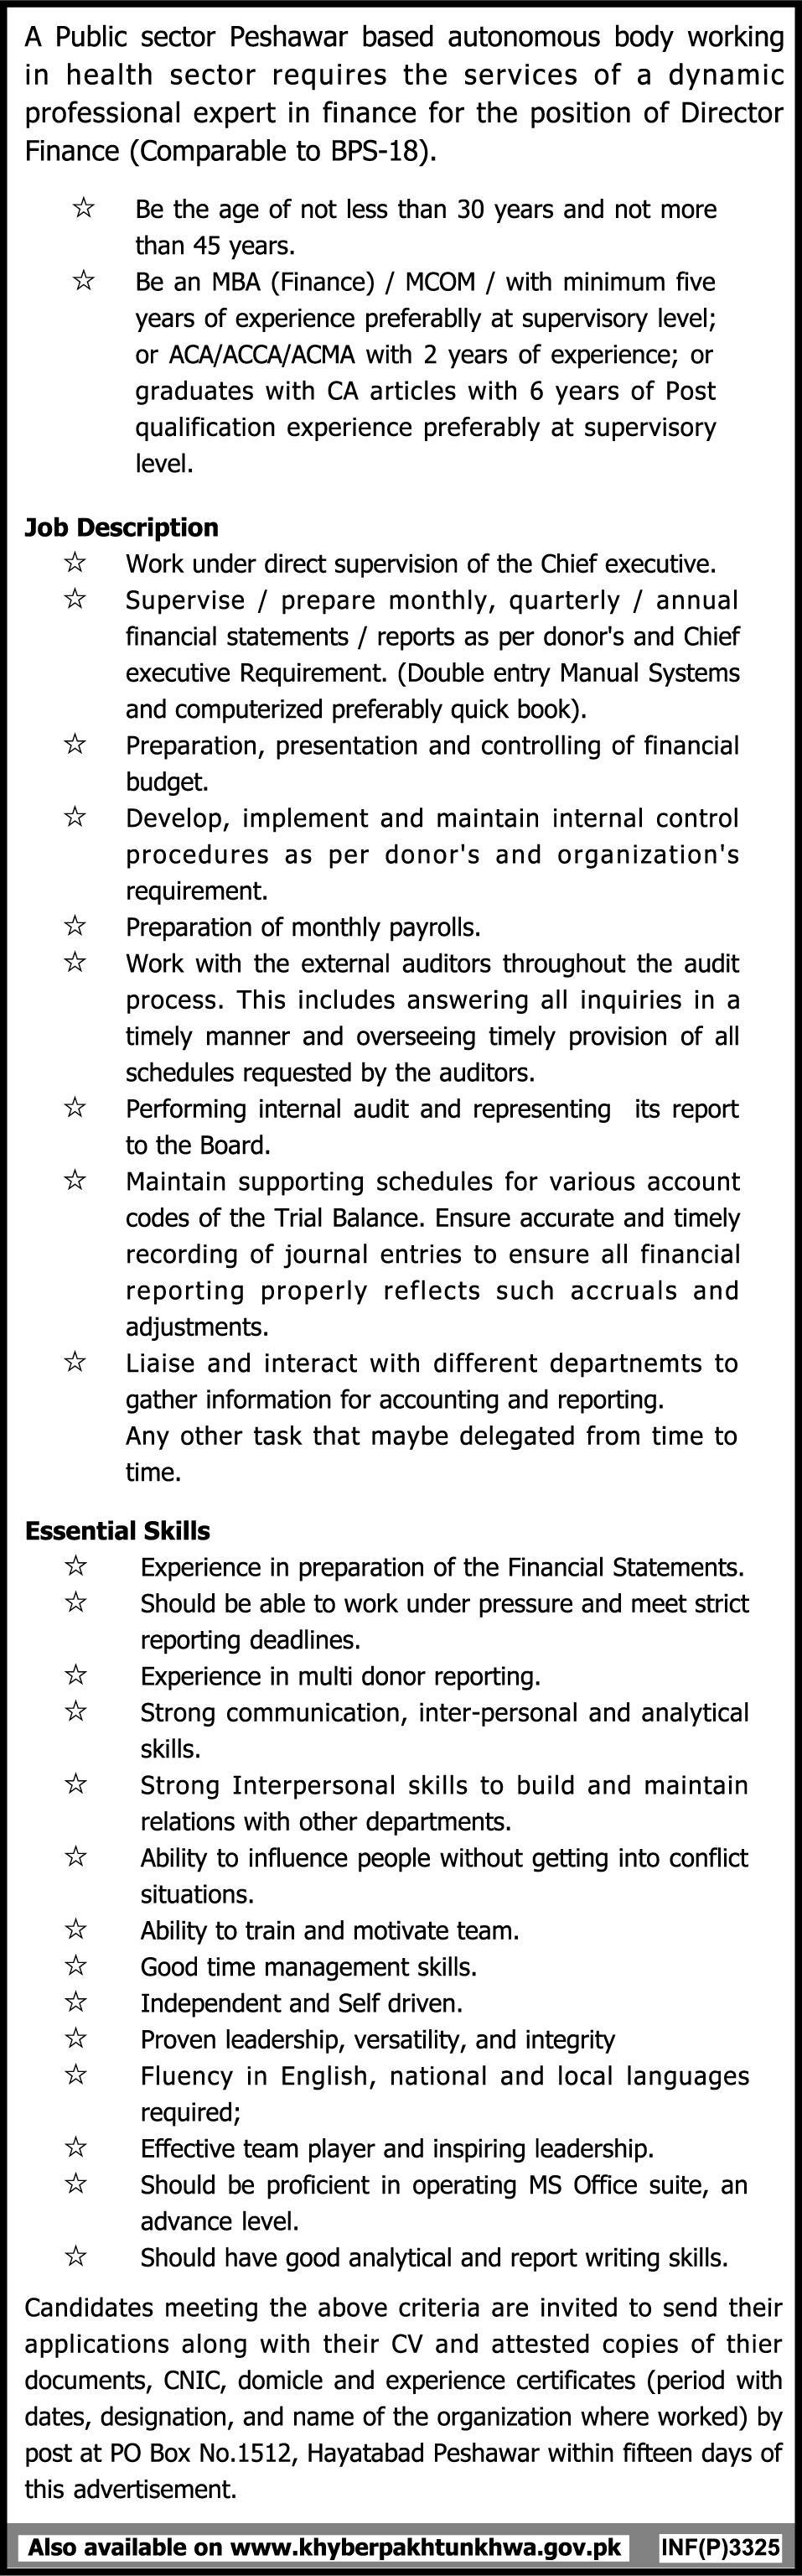 Director Finance Required by a Public Sector Health Organization